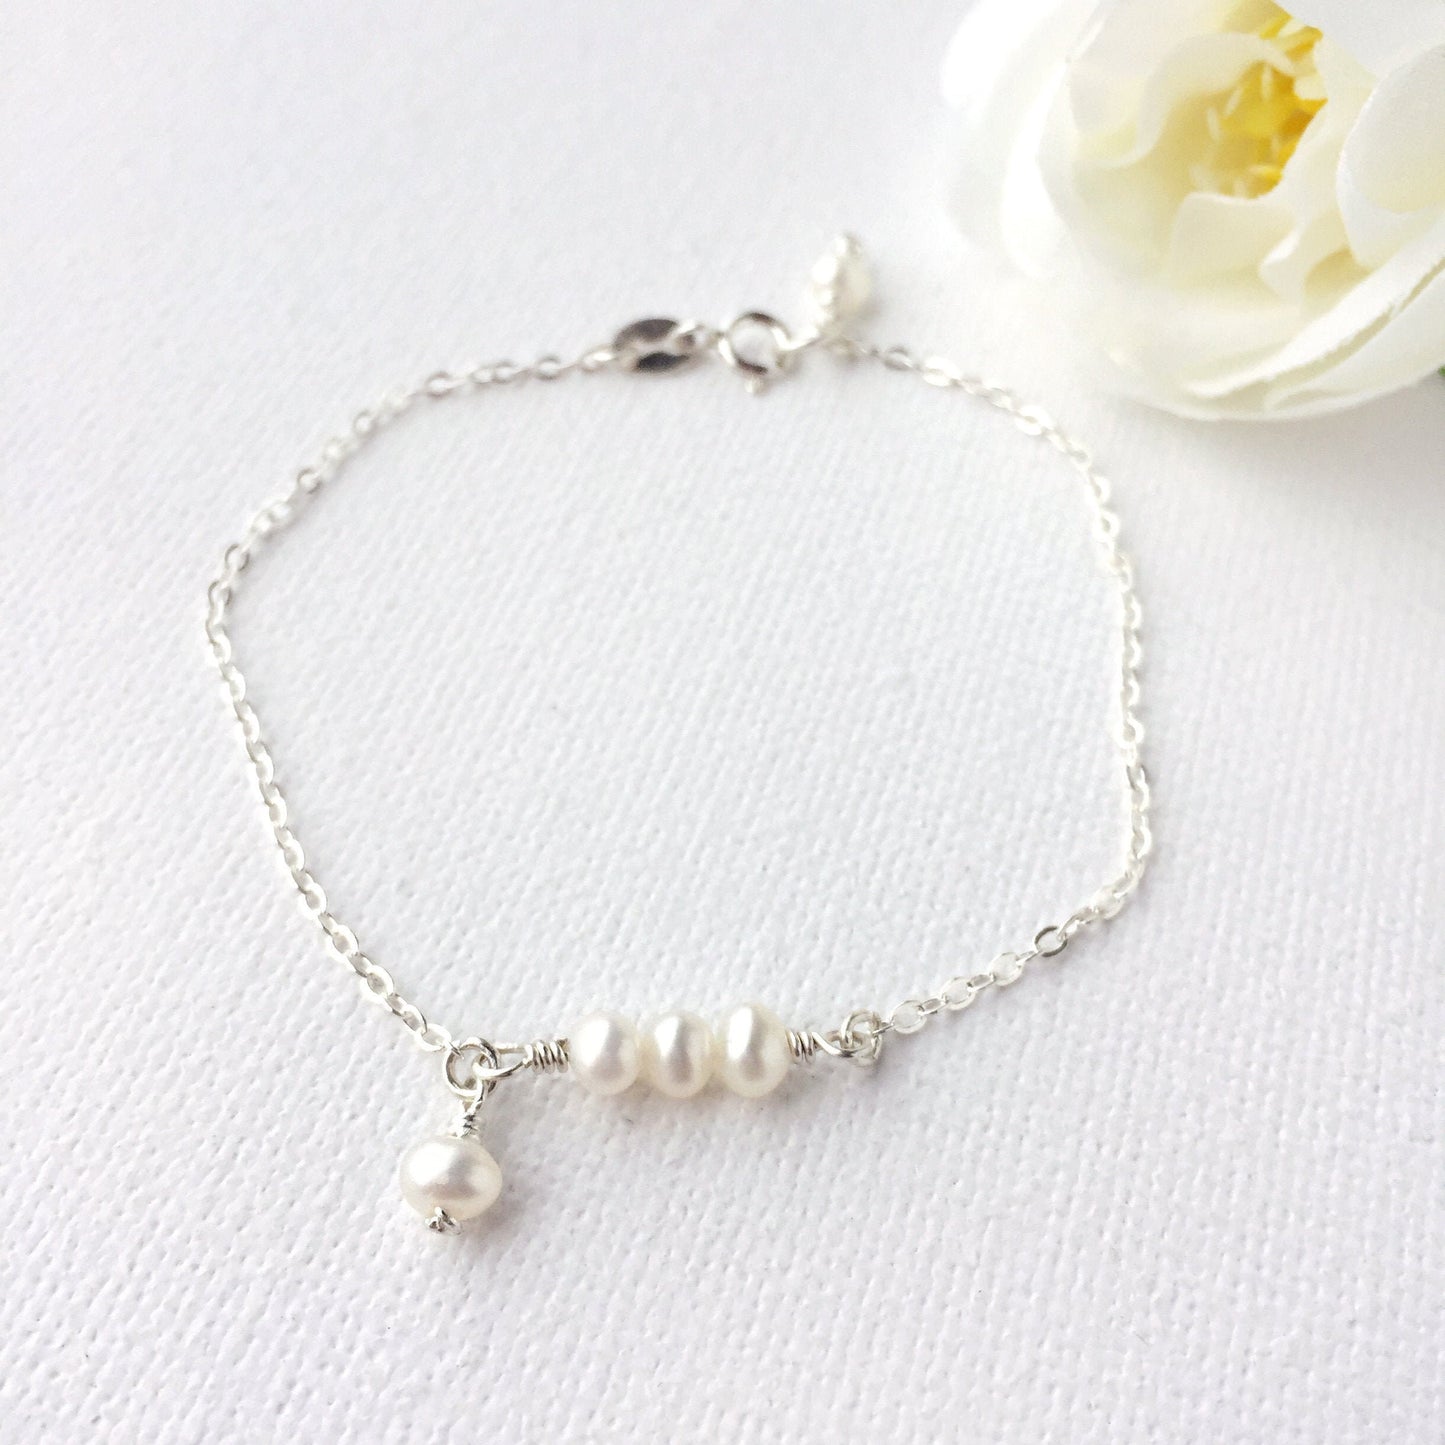 Delicate Freshwater Pearl Bracelet with Charm